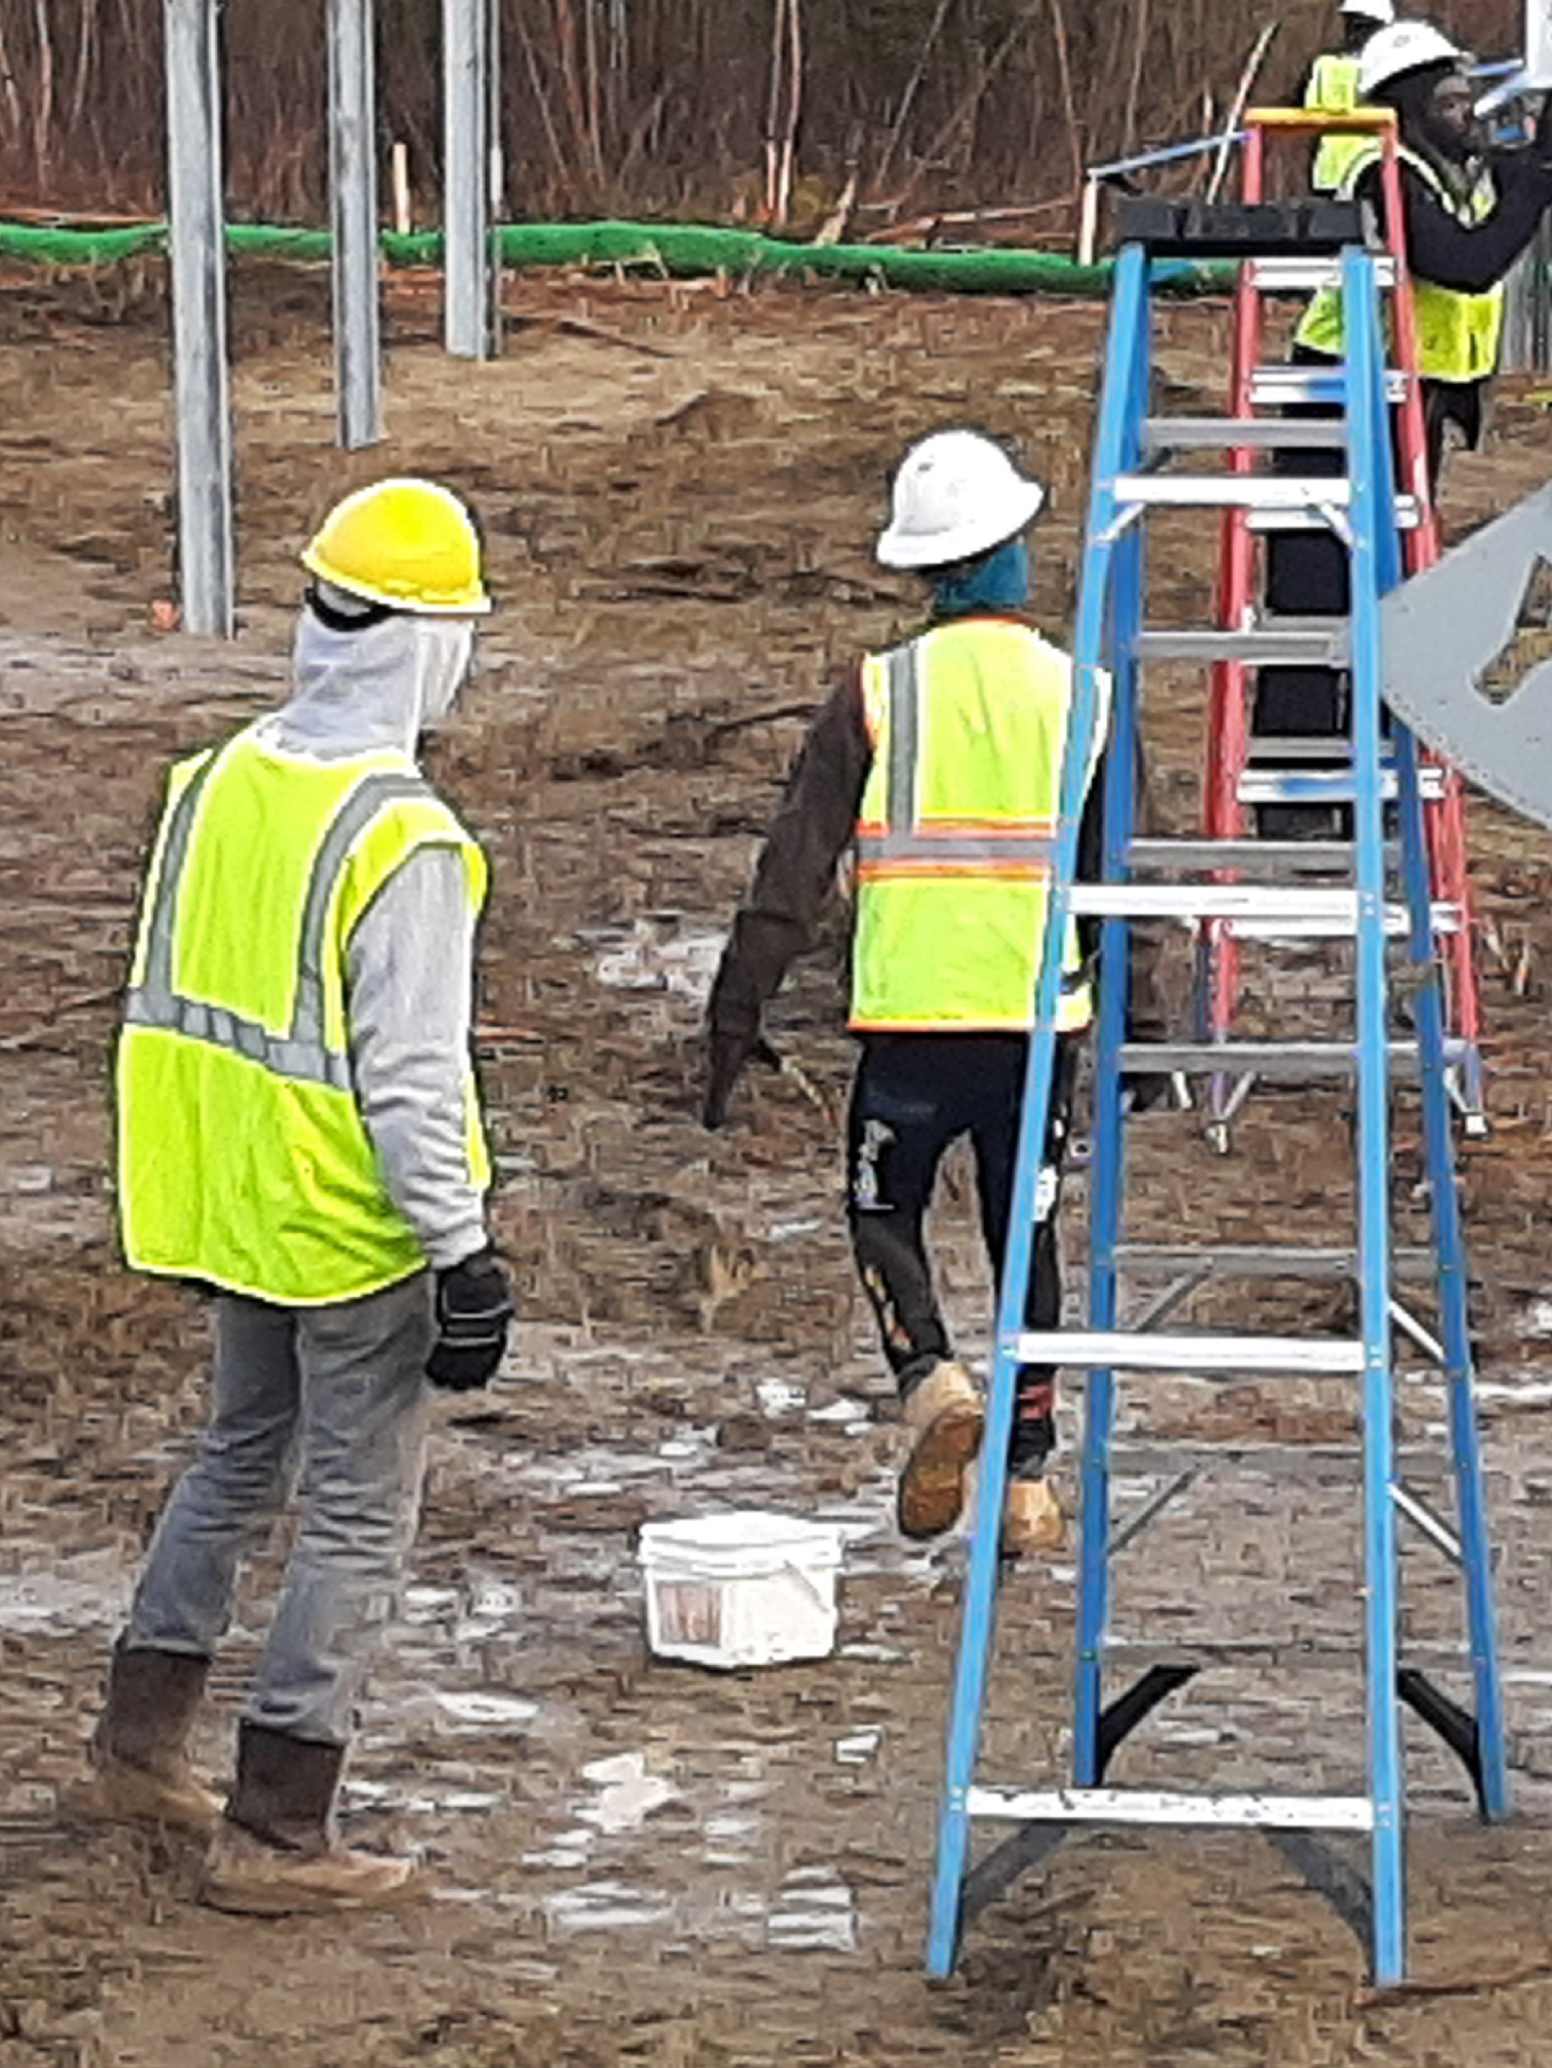 A group of construction workers walking on the ground.